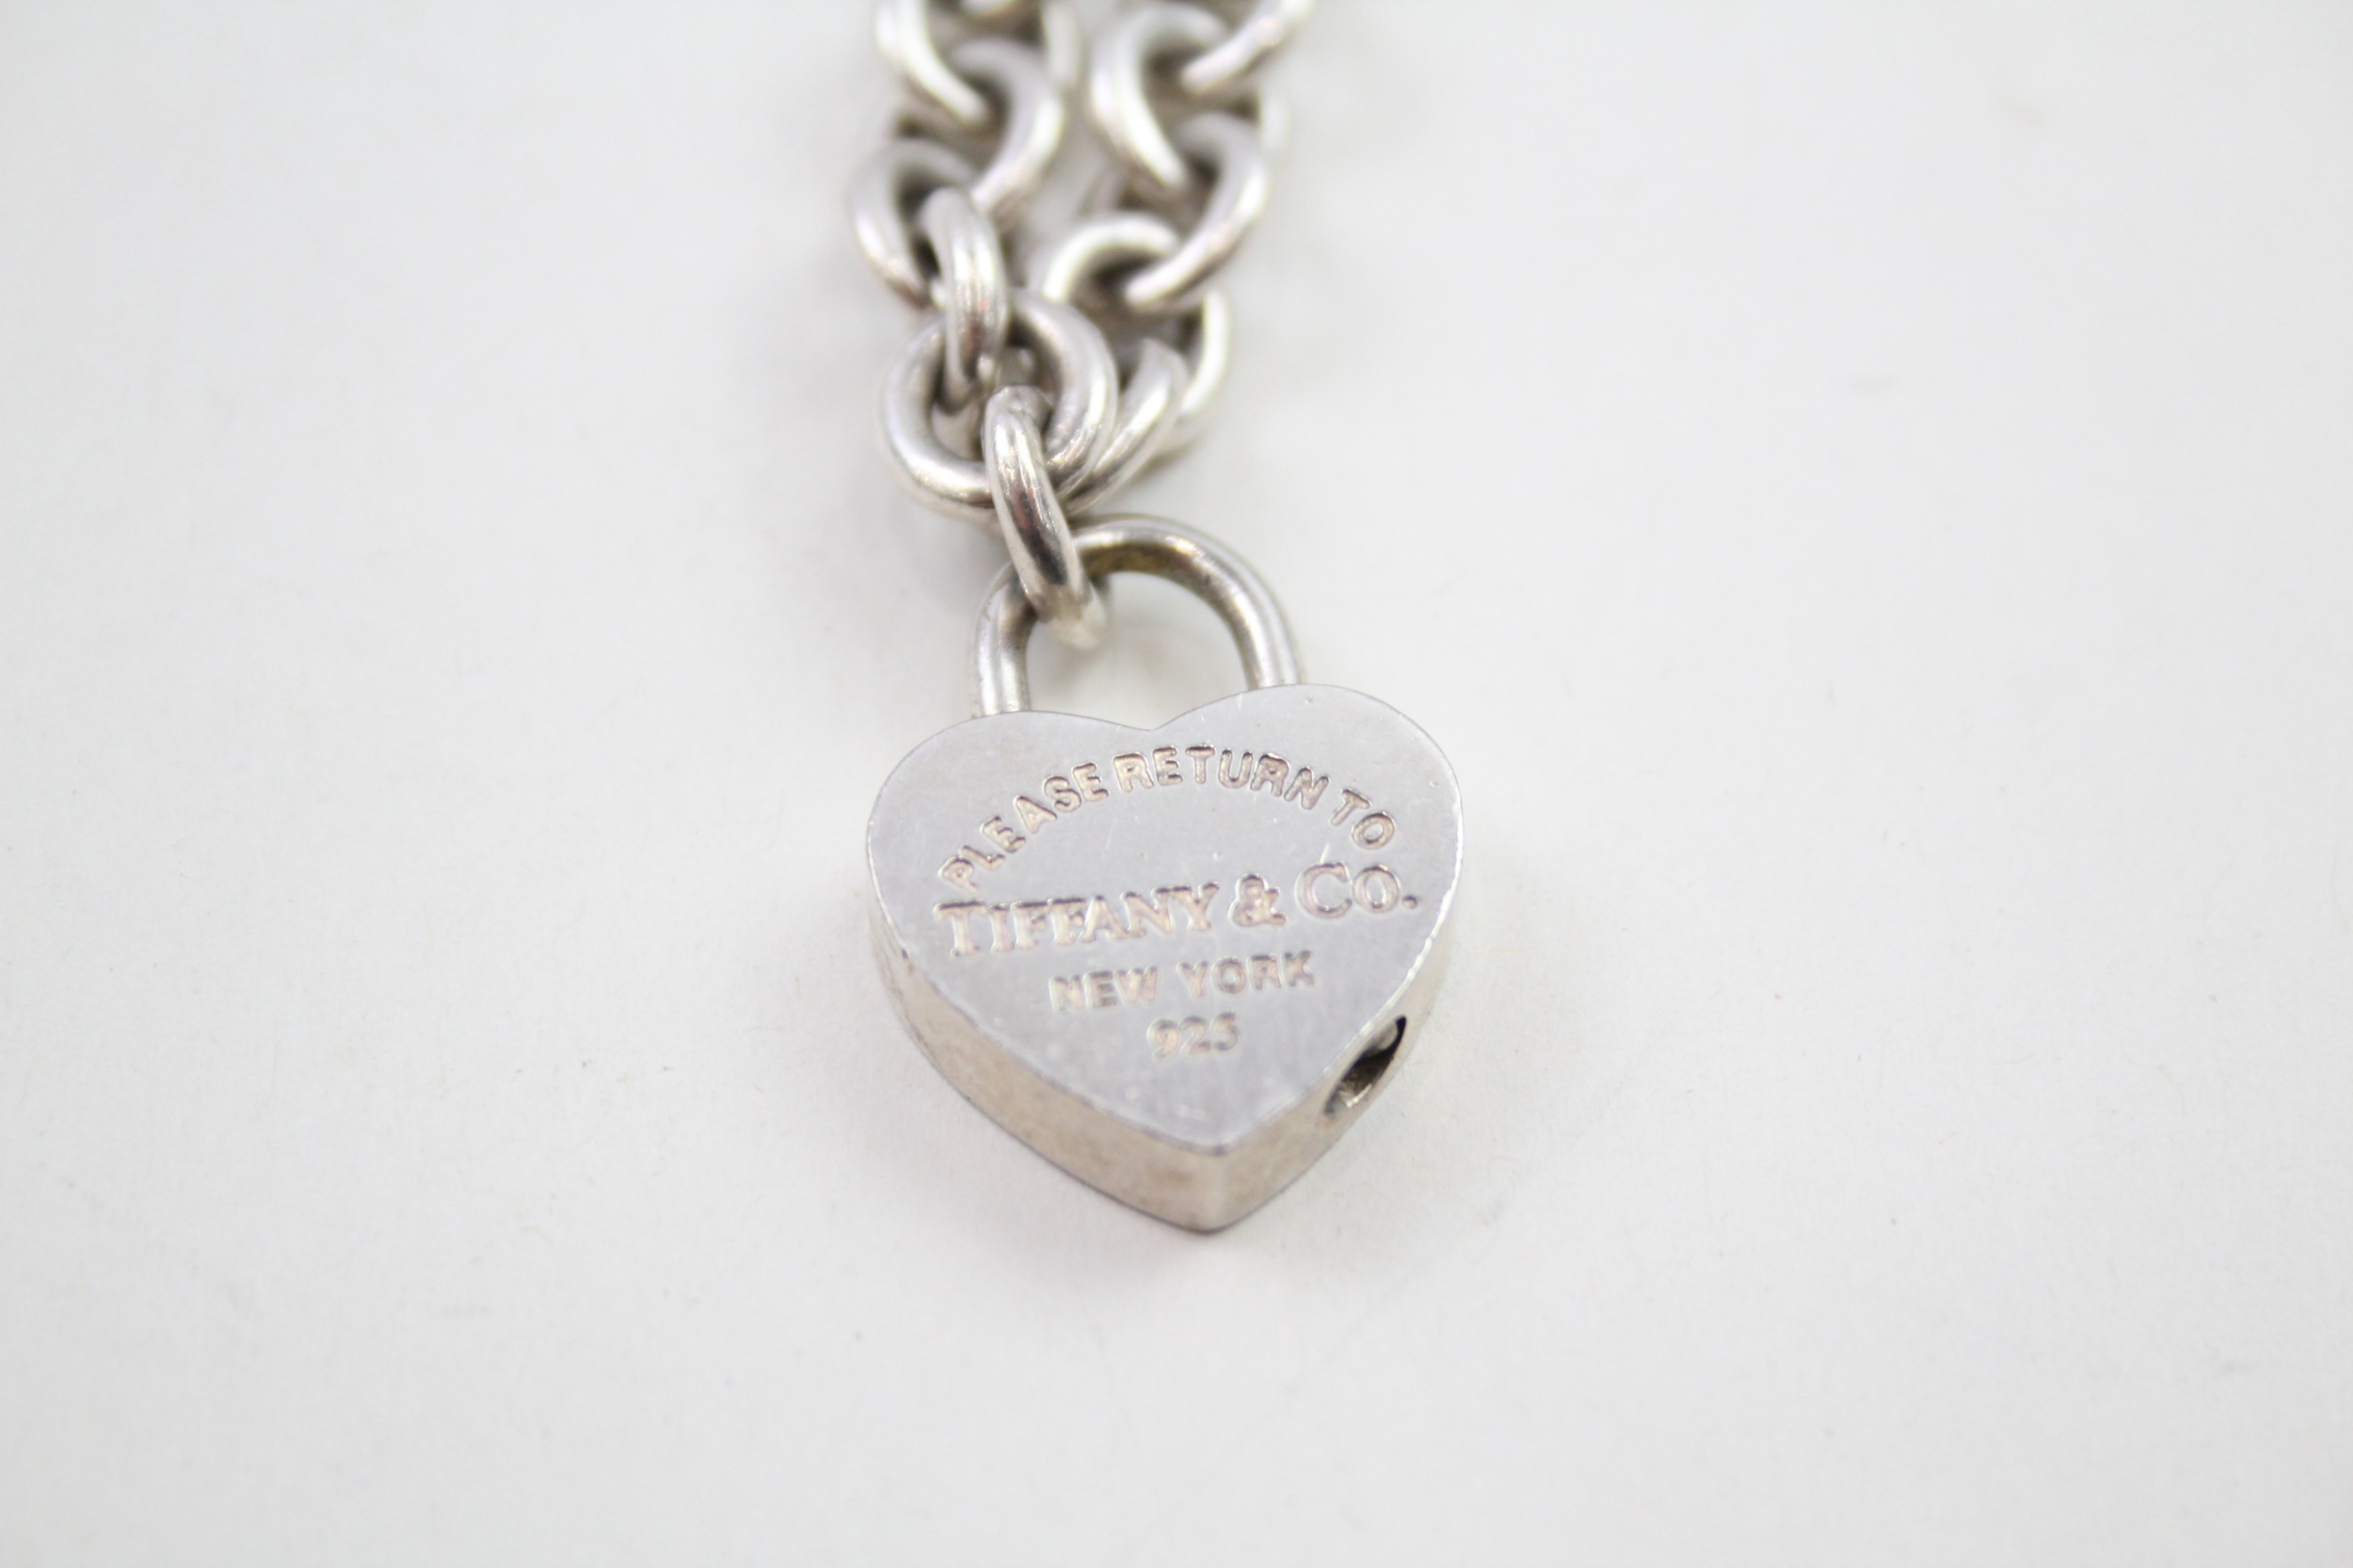 Silver bracelet with heart tag by designer Tiffany & Co (35g) - Image 5 of 7